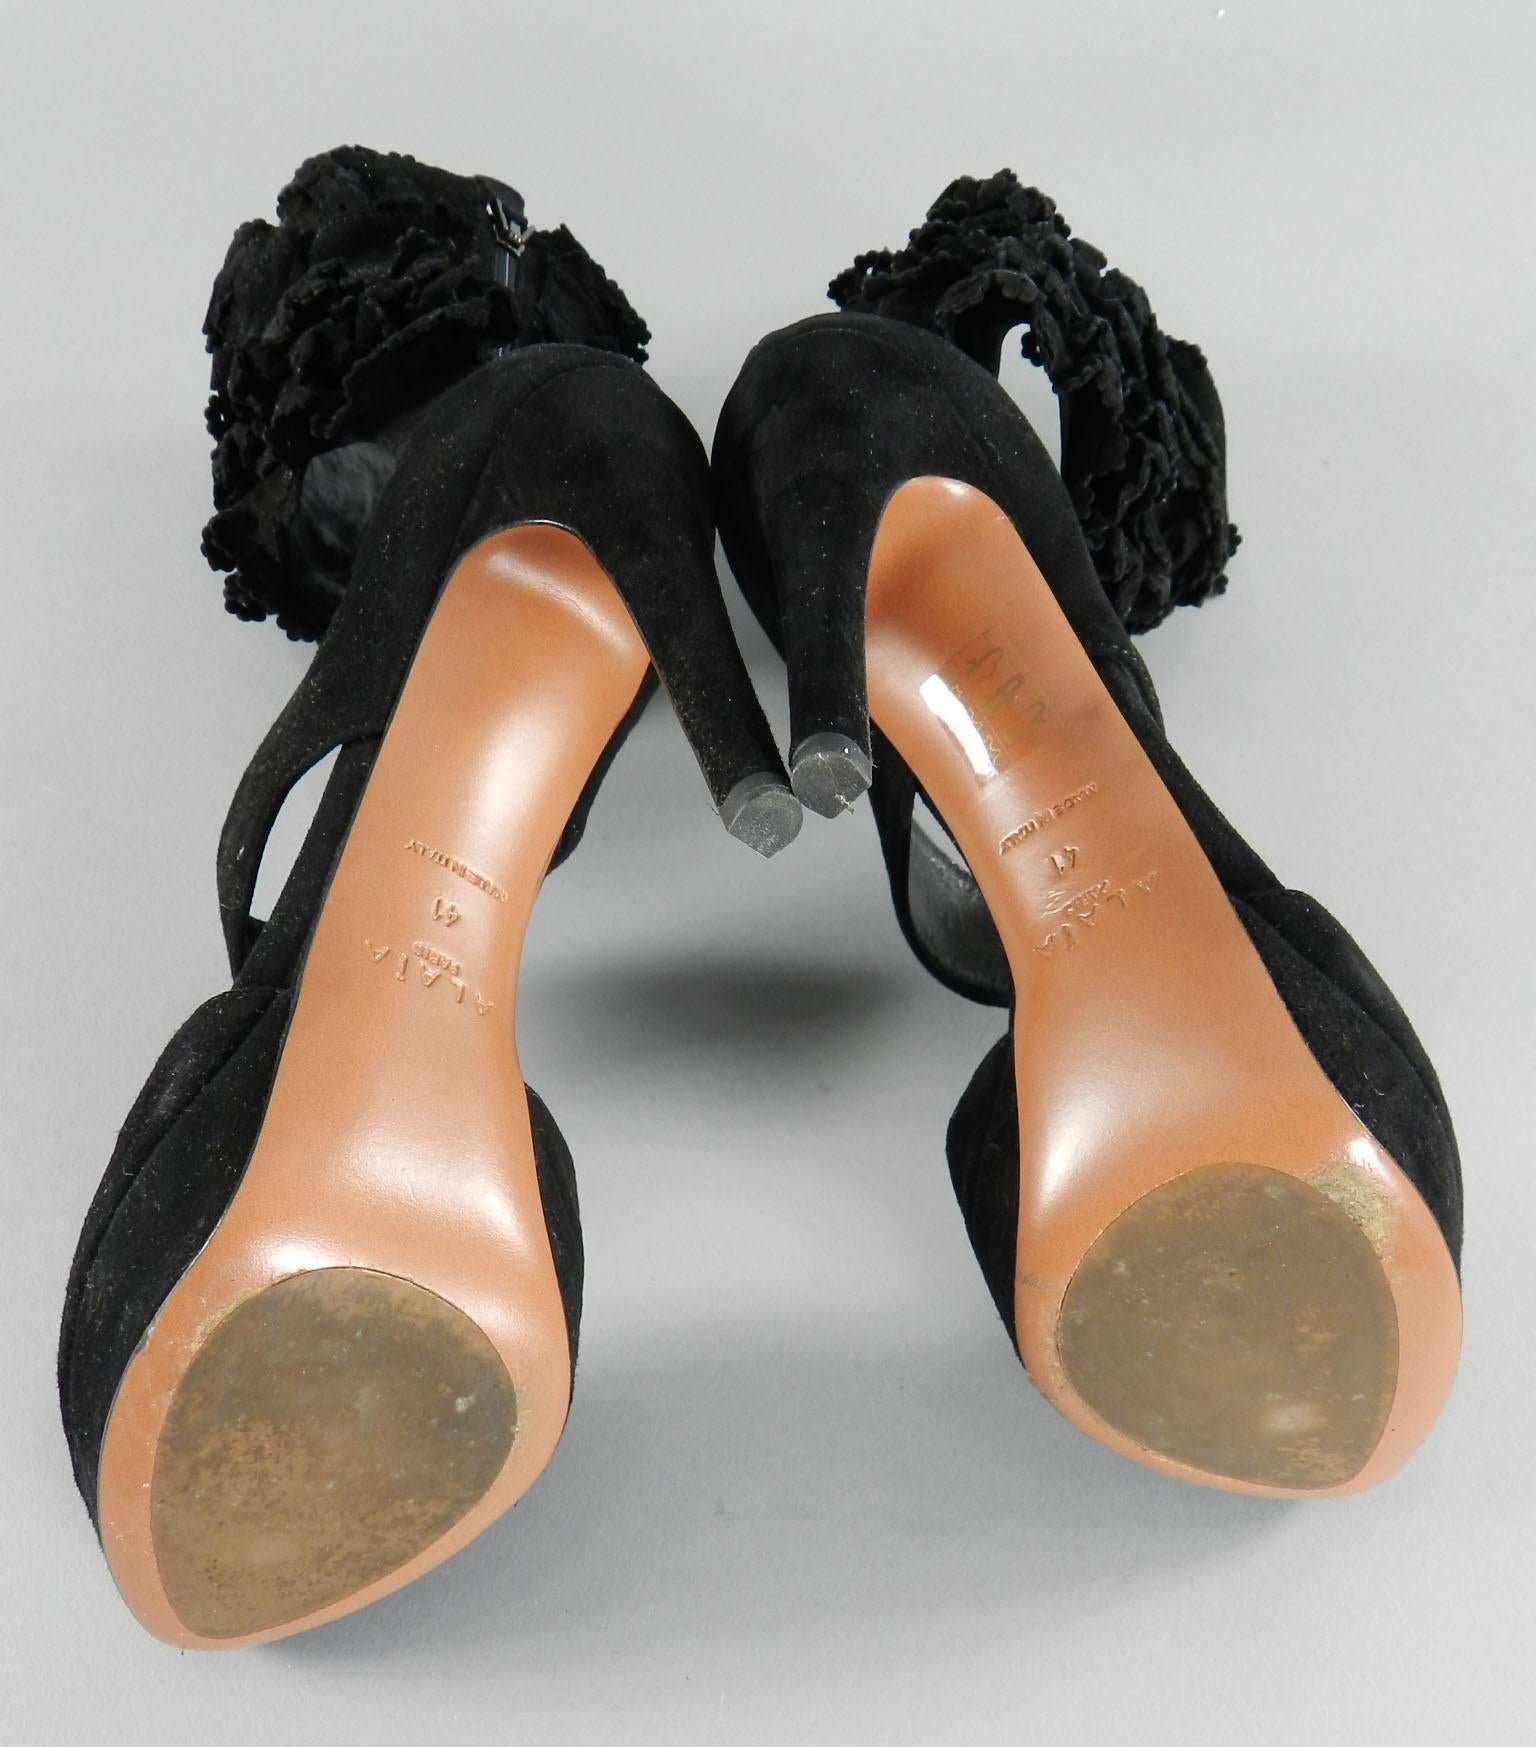 Alaia Black Suede Ruffle Ankle Heels - size 41 1